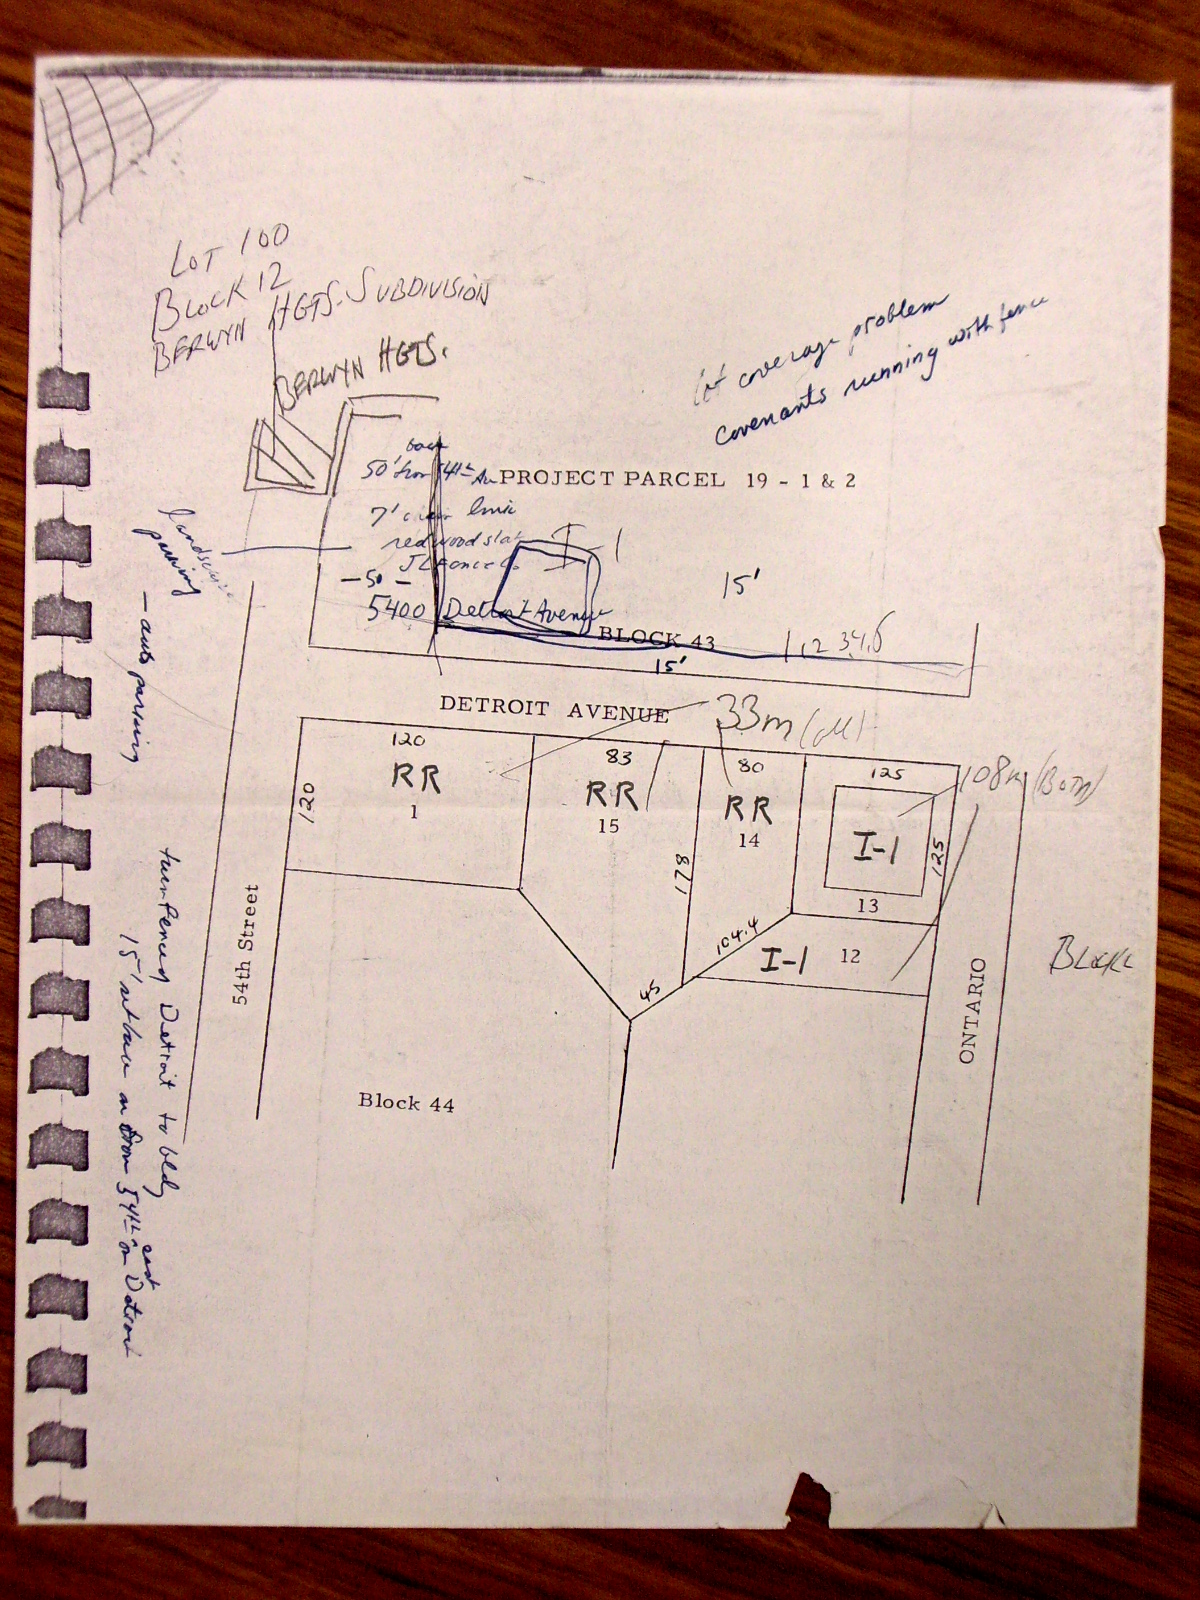 Plat of Project Parcel 19 - 1 & 2 hand written notations